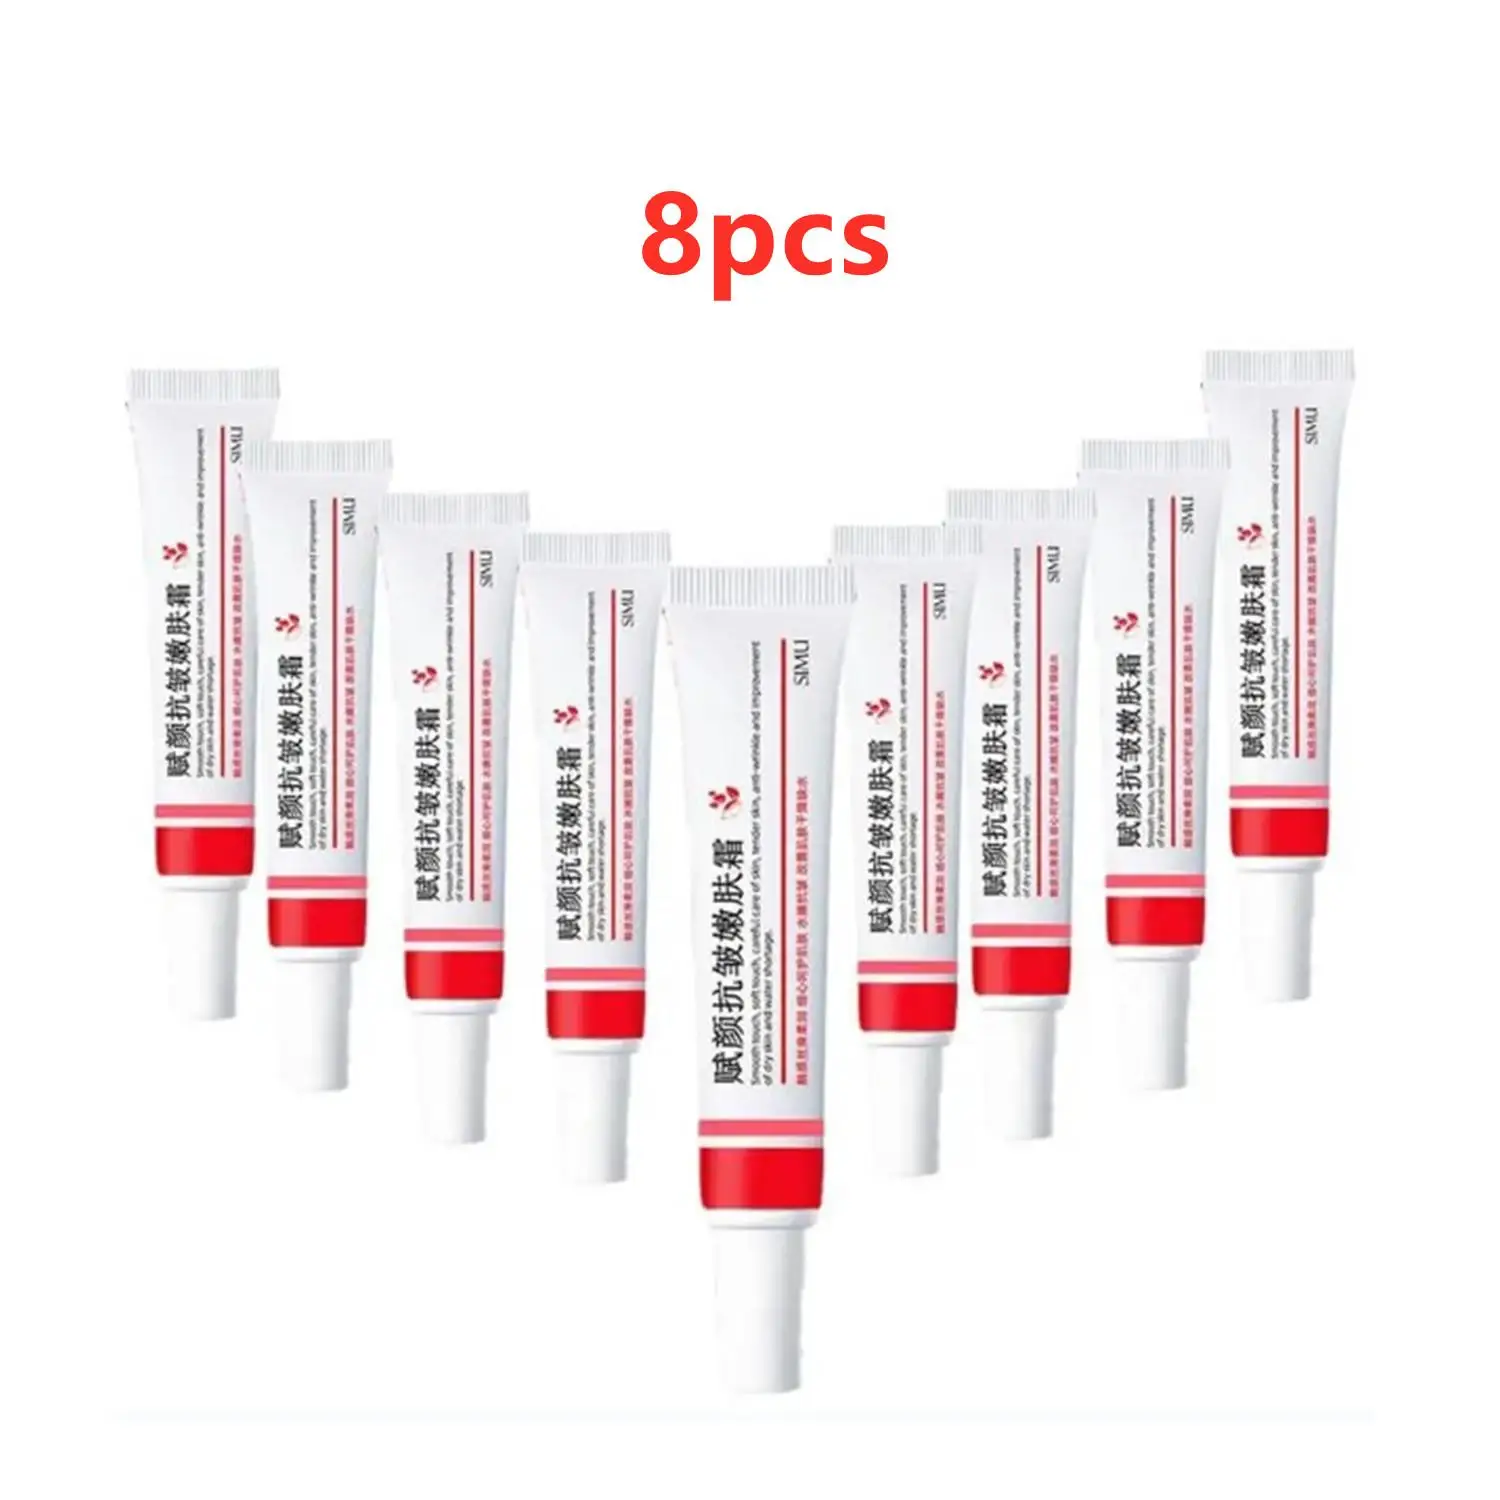 8PCS Retinol Firming Face Cream Remove Wrinkle Anti-Aging Fade Fine Lines Acne Treatment Shrink Pores Creams Beauty Skin Care